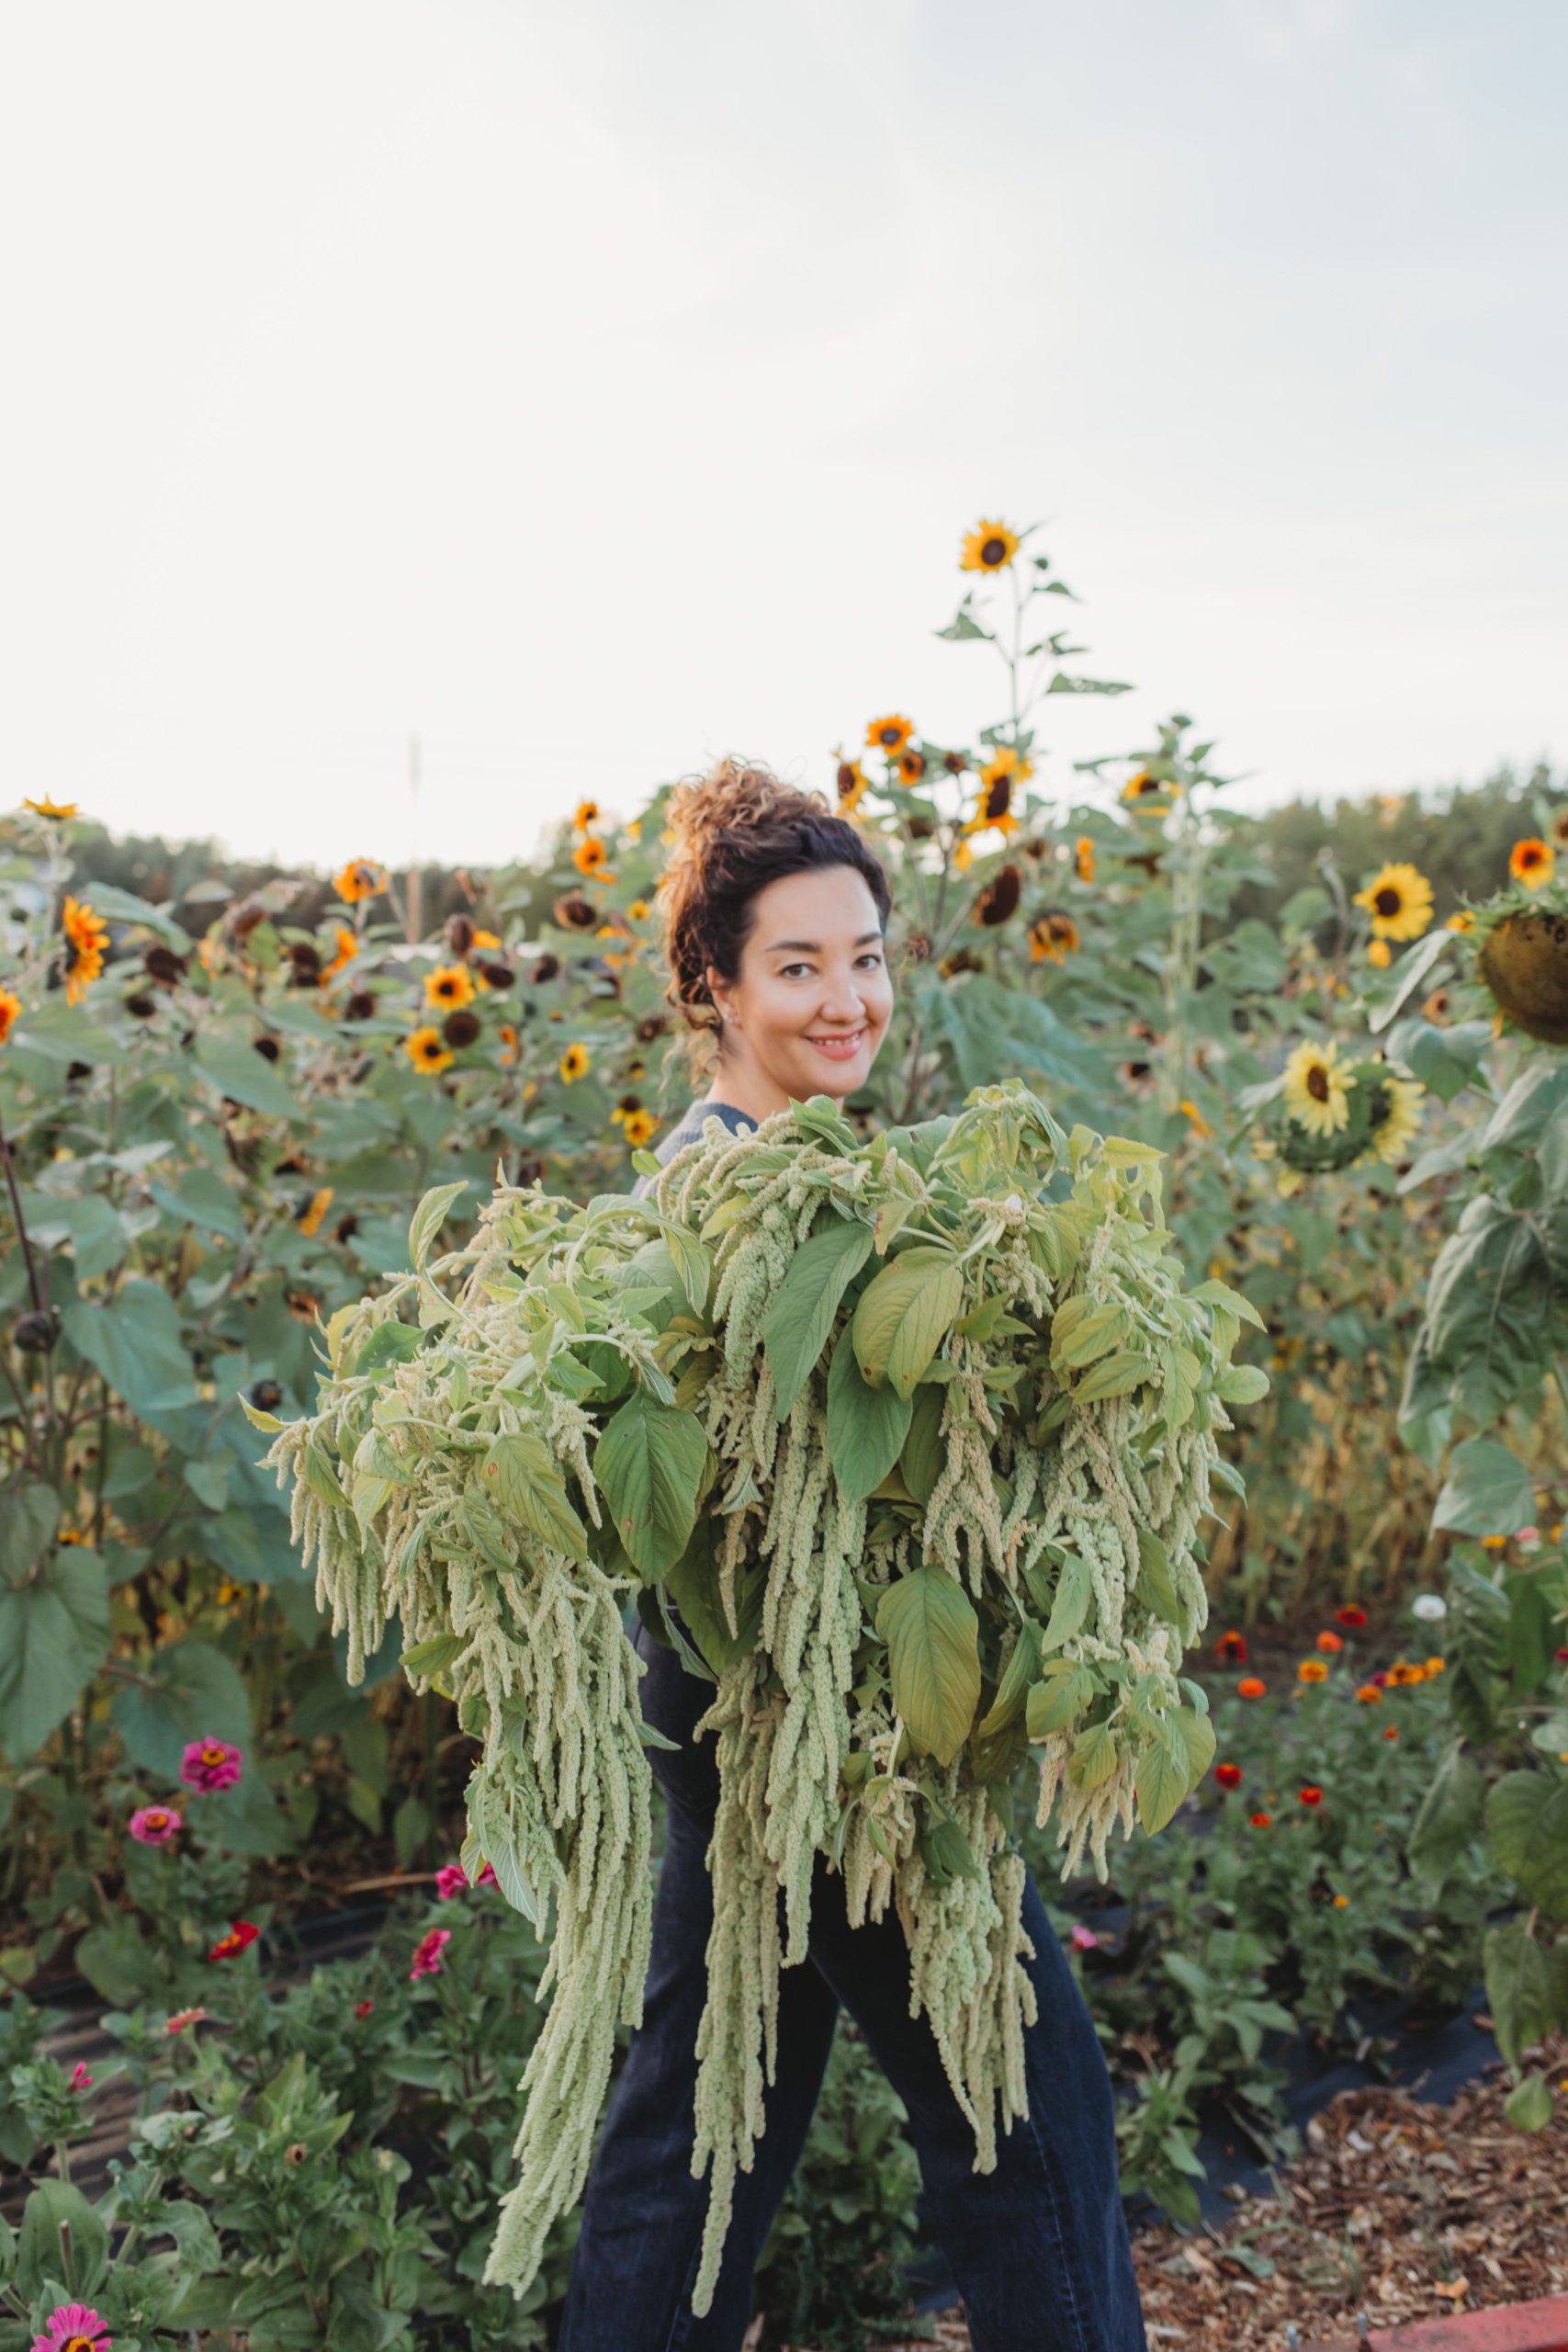 Ashley Sims standing in a field of sunflowers carrying an enormous bouquet of cascading amaranth